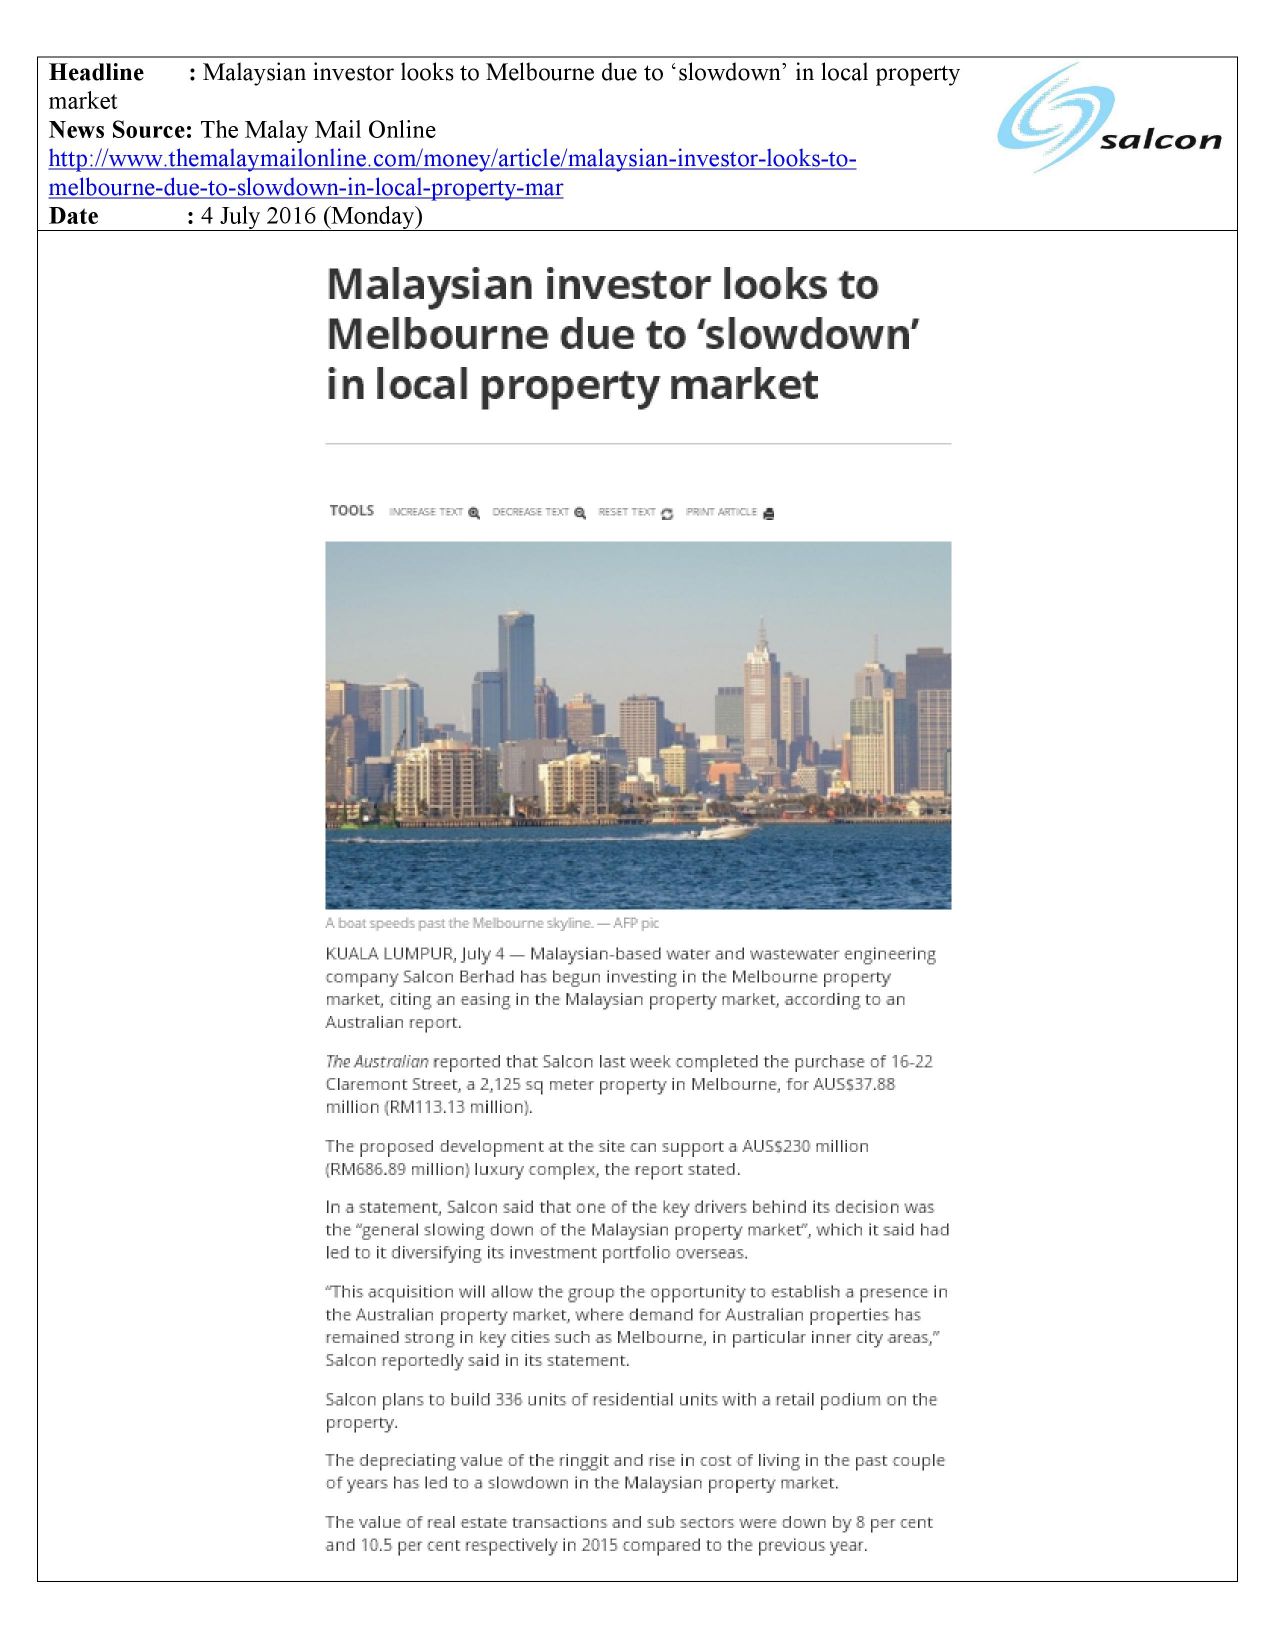 Malaysian investor looks to Melbourne due to ‘slowdown’ in local property market